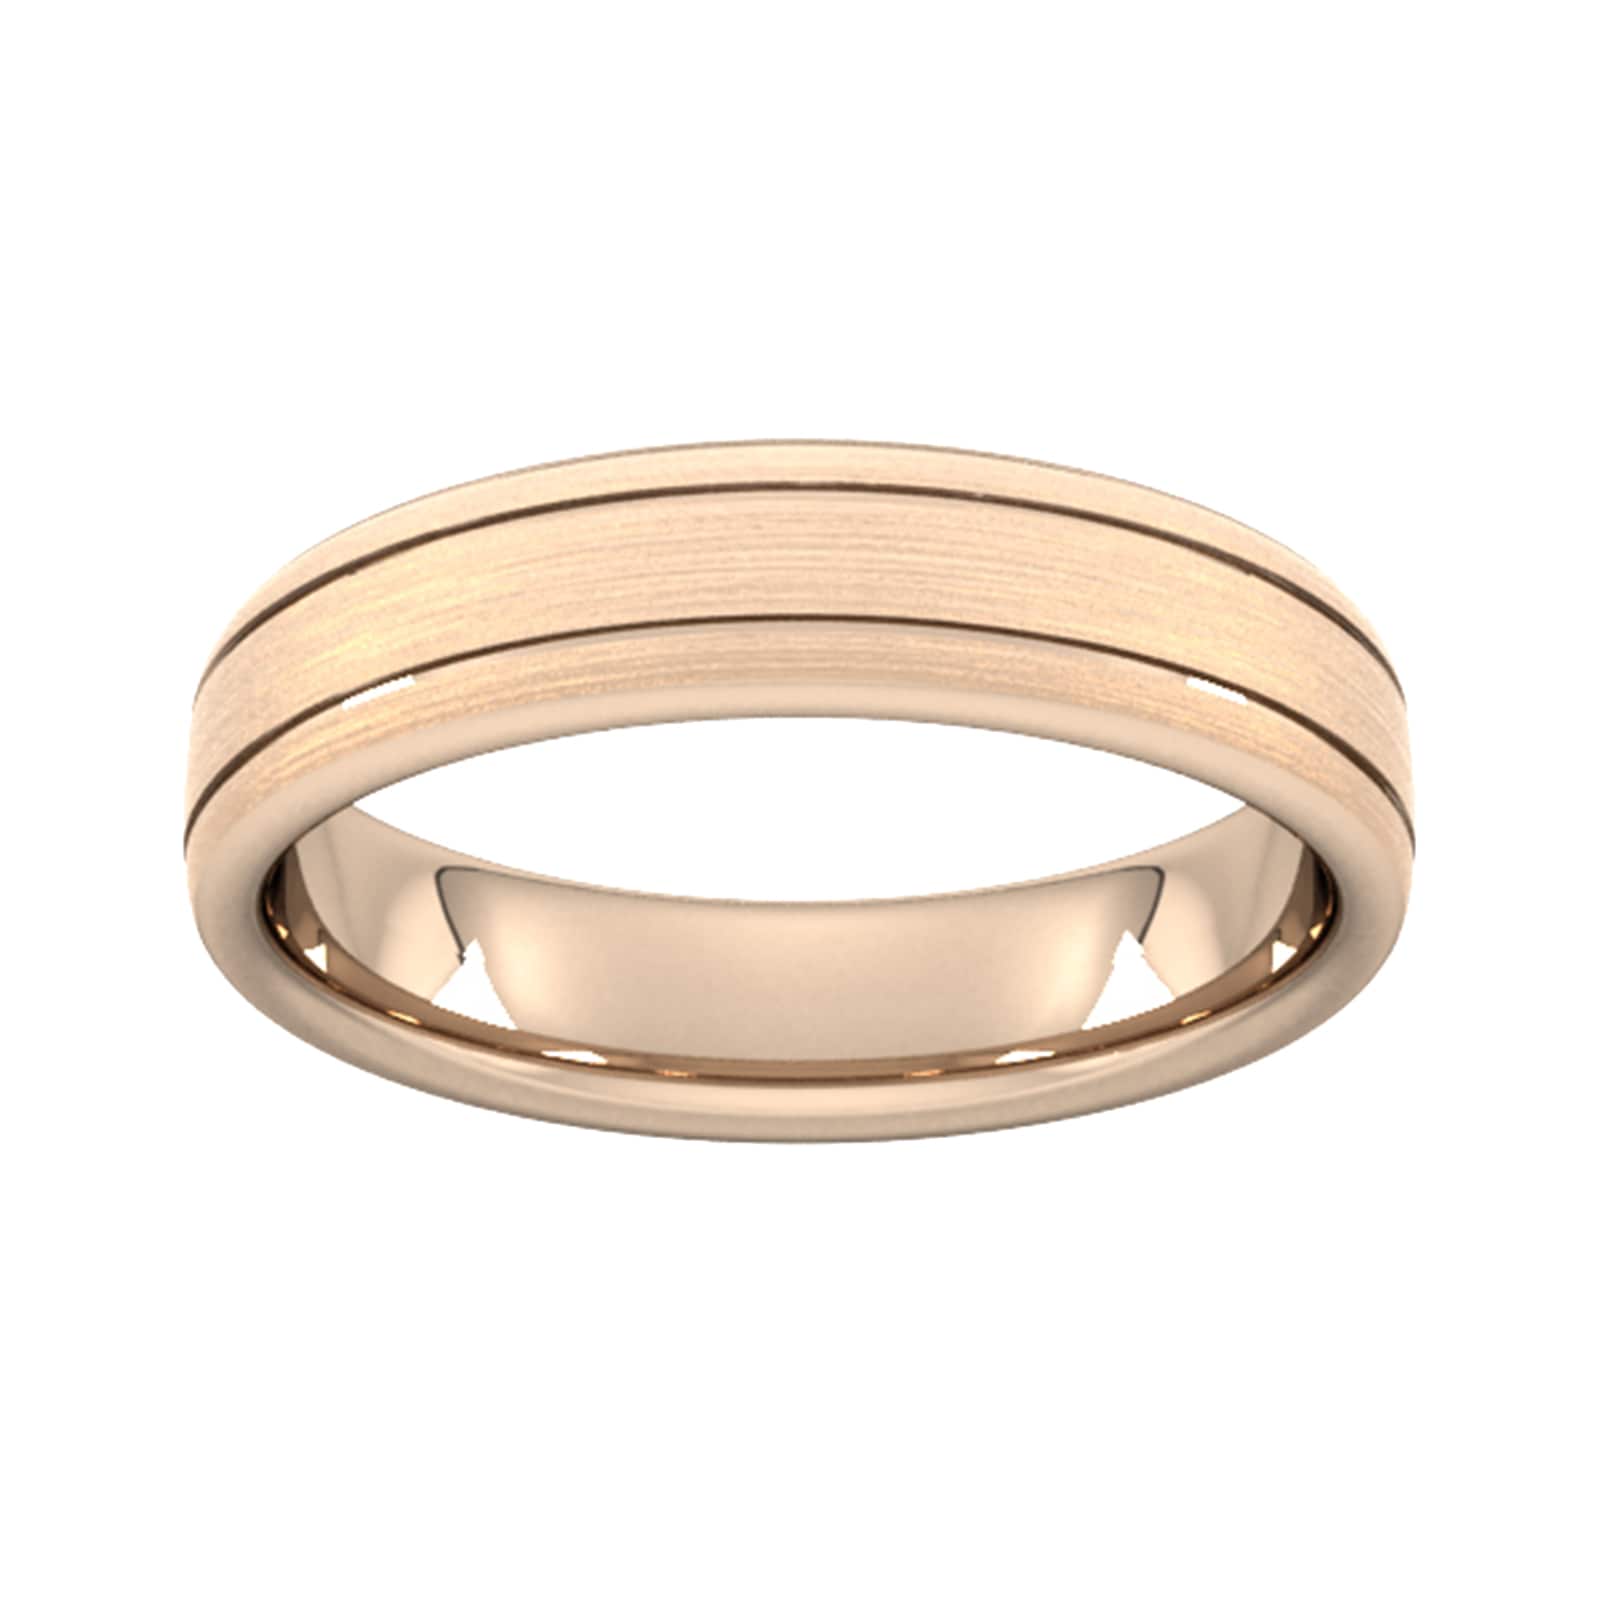 5mm Slight Court Heavy Matt Finish With Double Grooves Wedding Ring In 18 Carat Rose Gold - Ring Size P